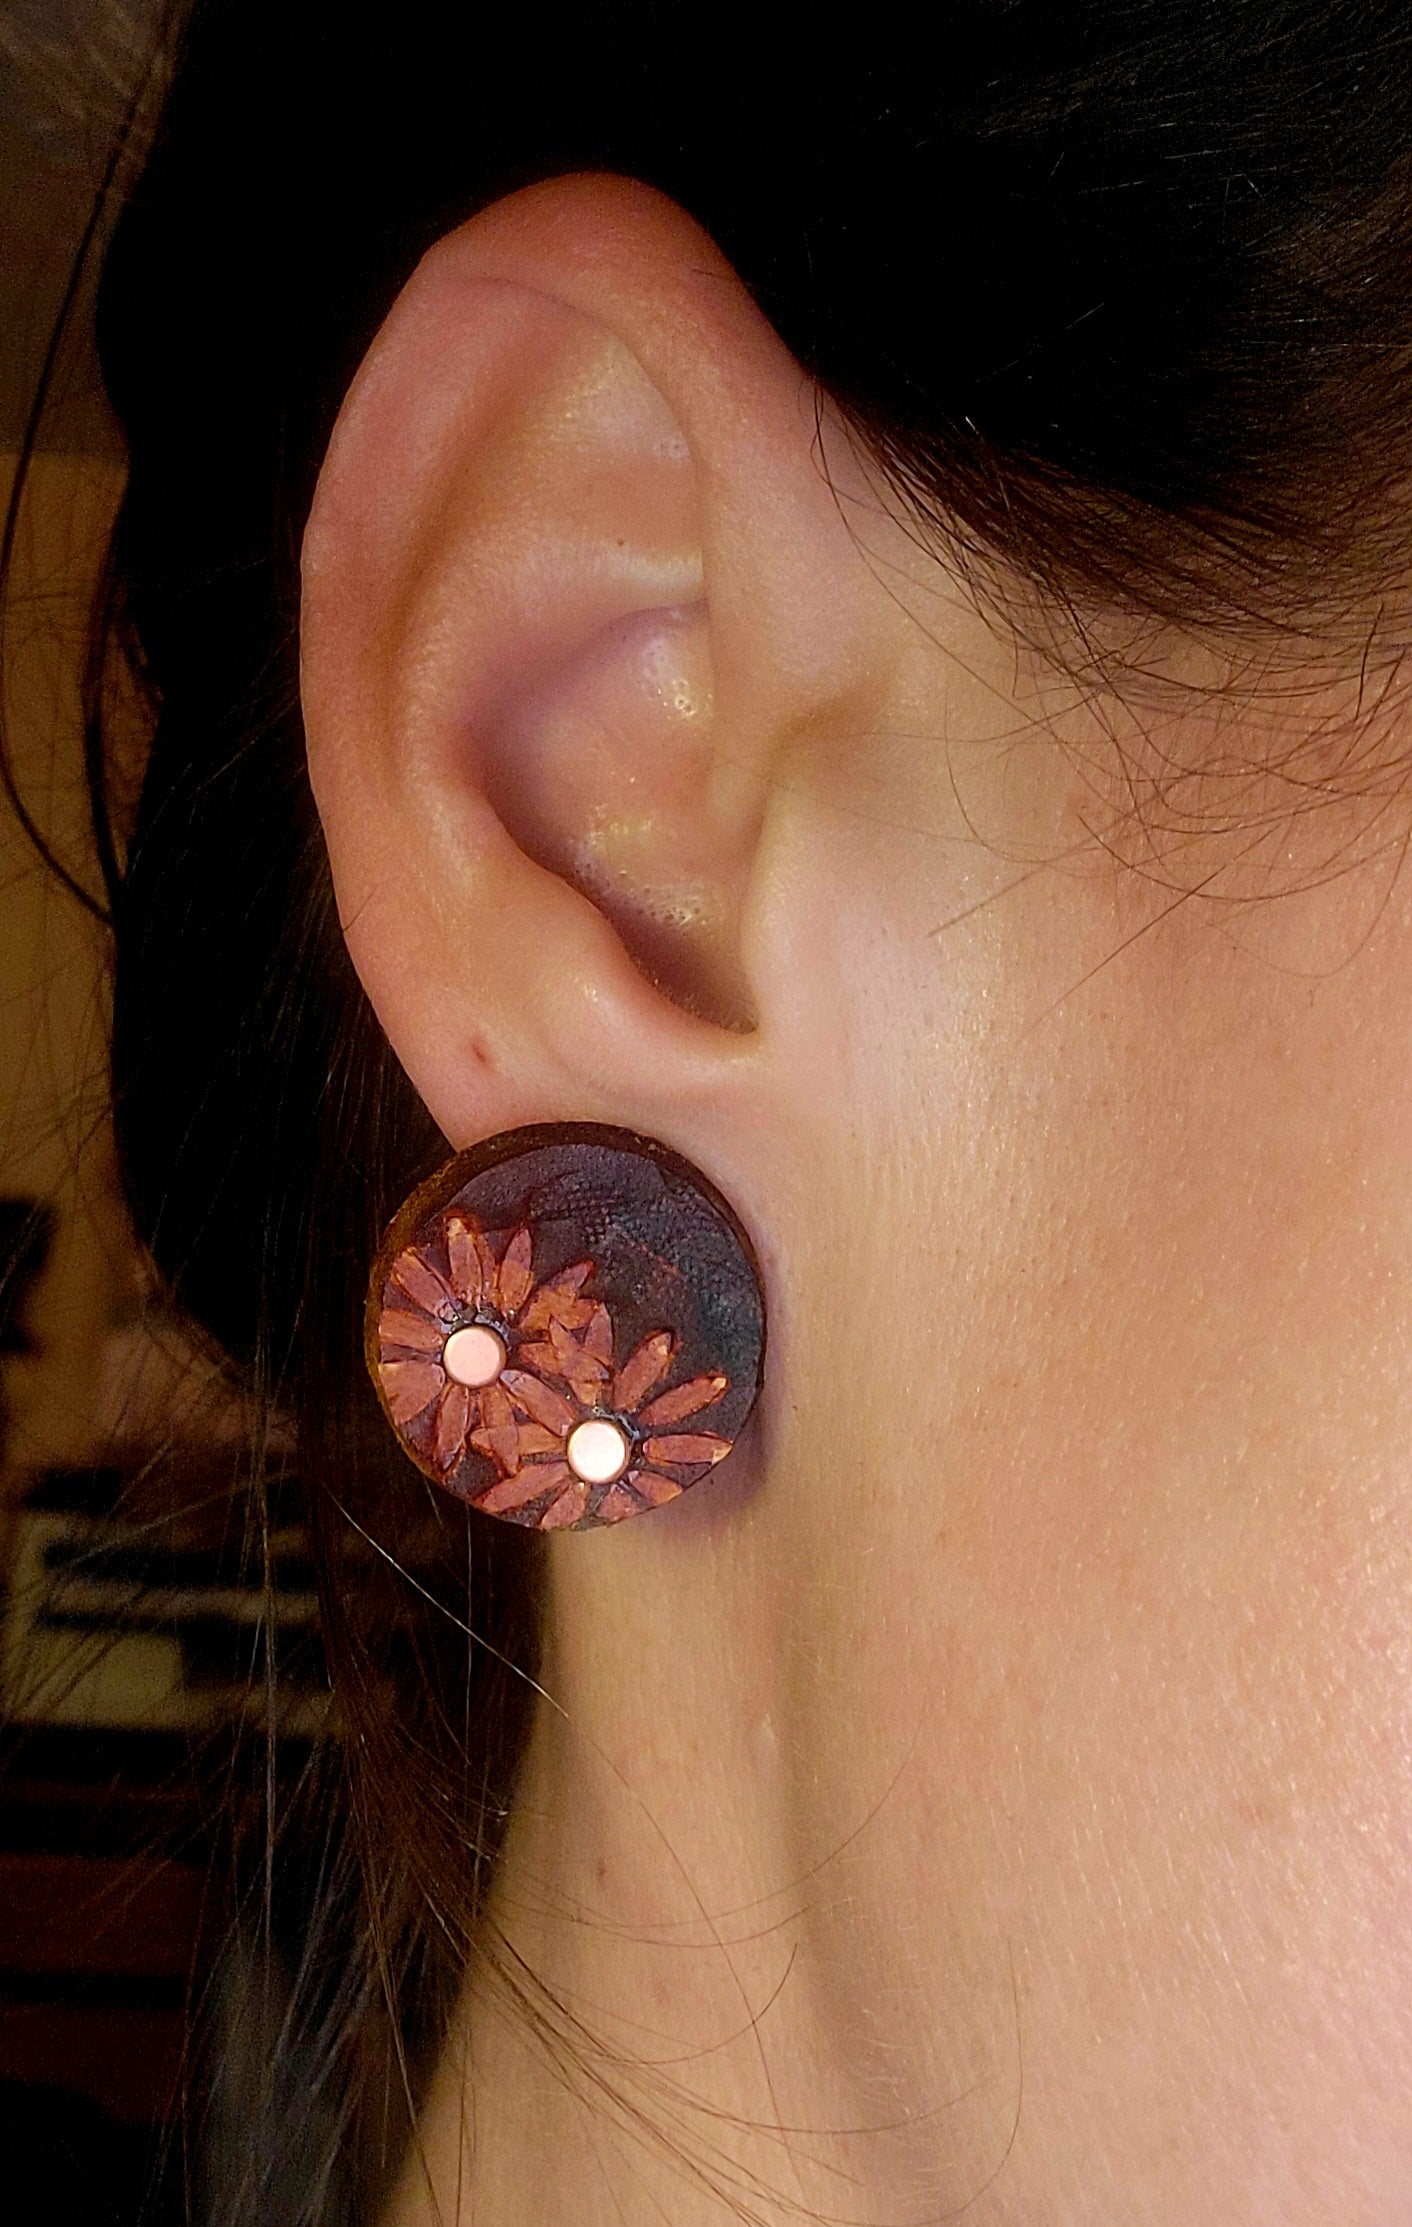 Earrings - Leather Flower Studs with copper accents